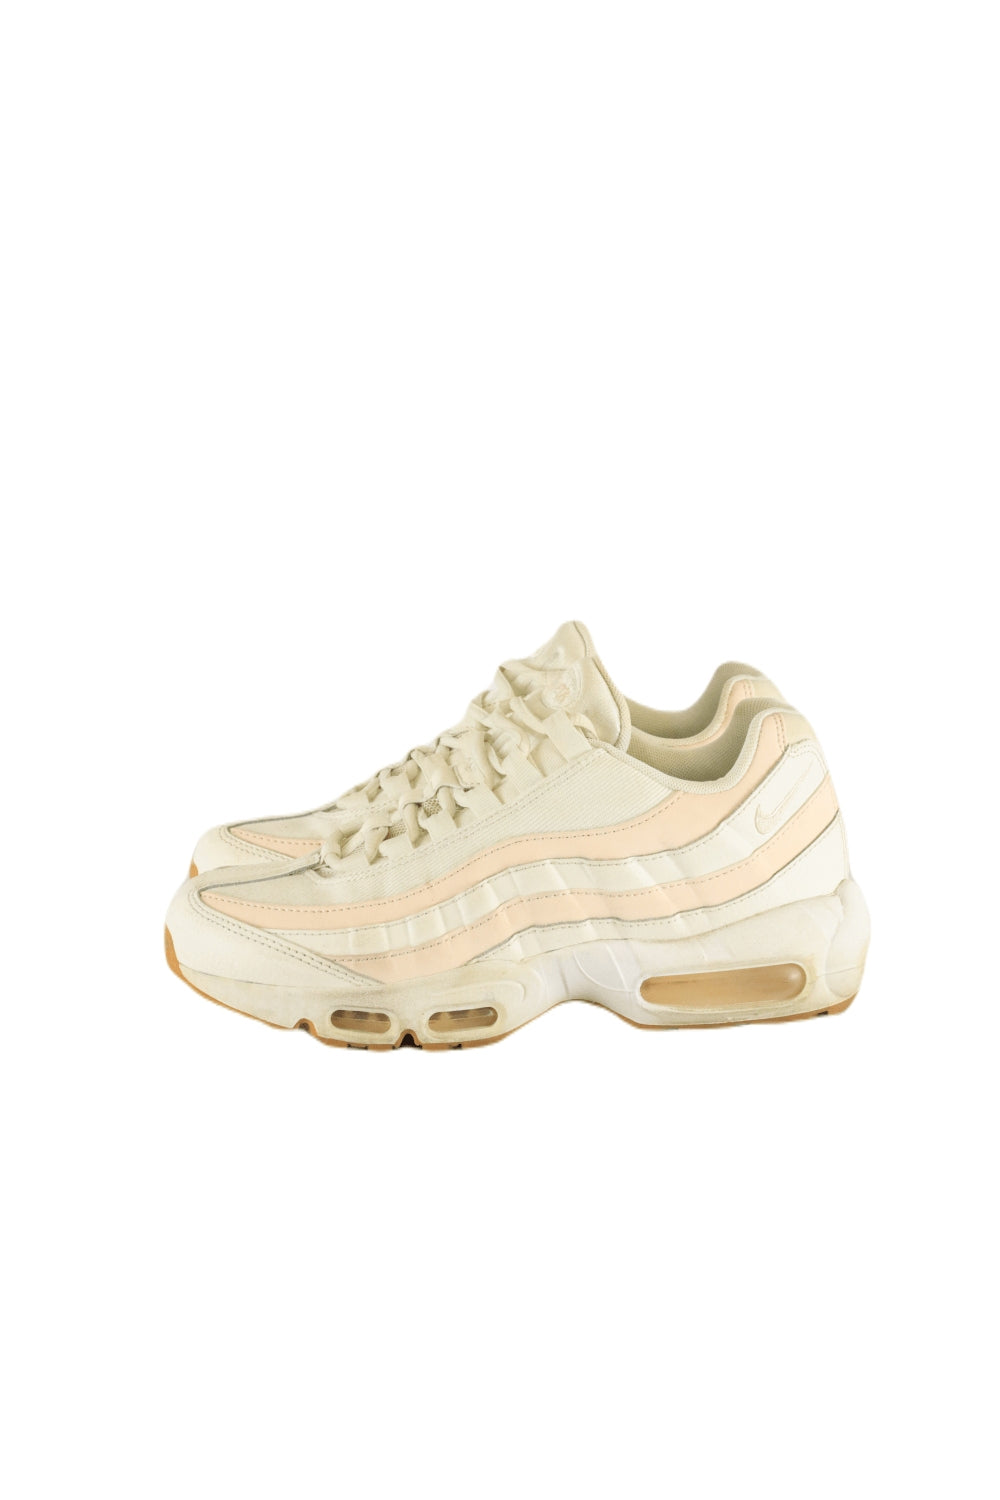 Nike Air Max 95 &quot;Guava Ice&quot;  Pink and White Sneakers 39